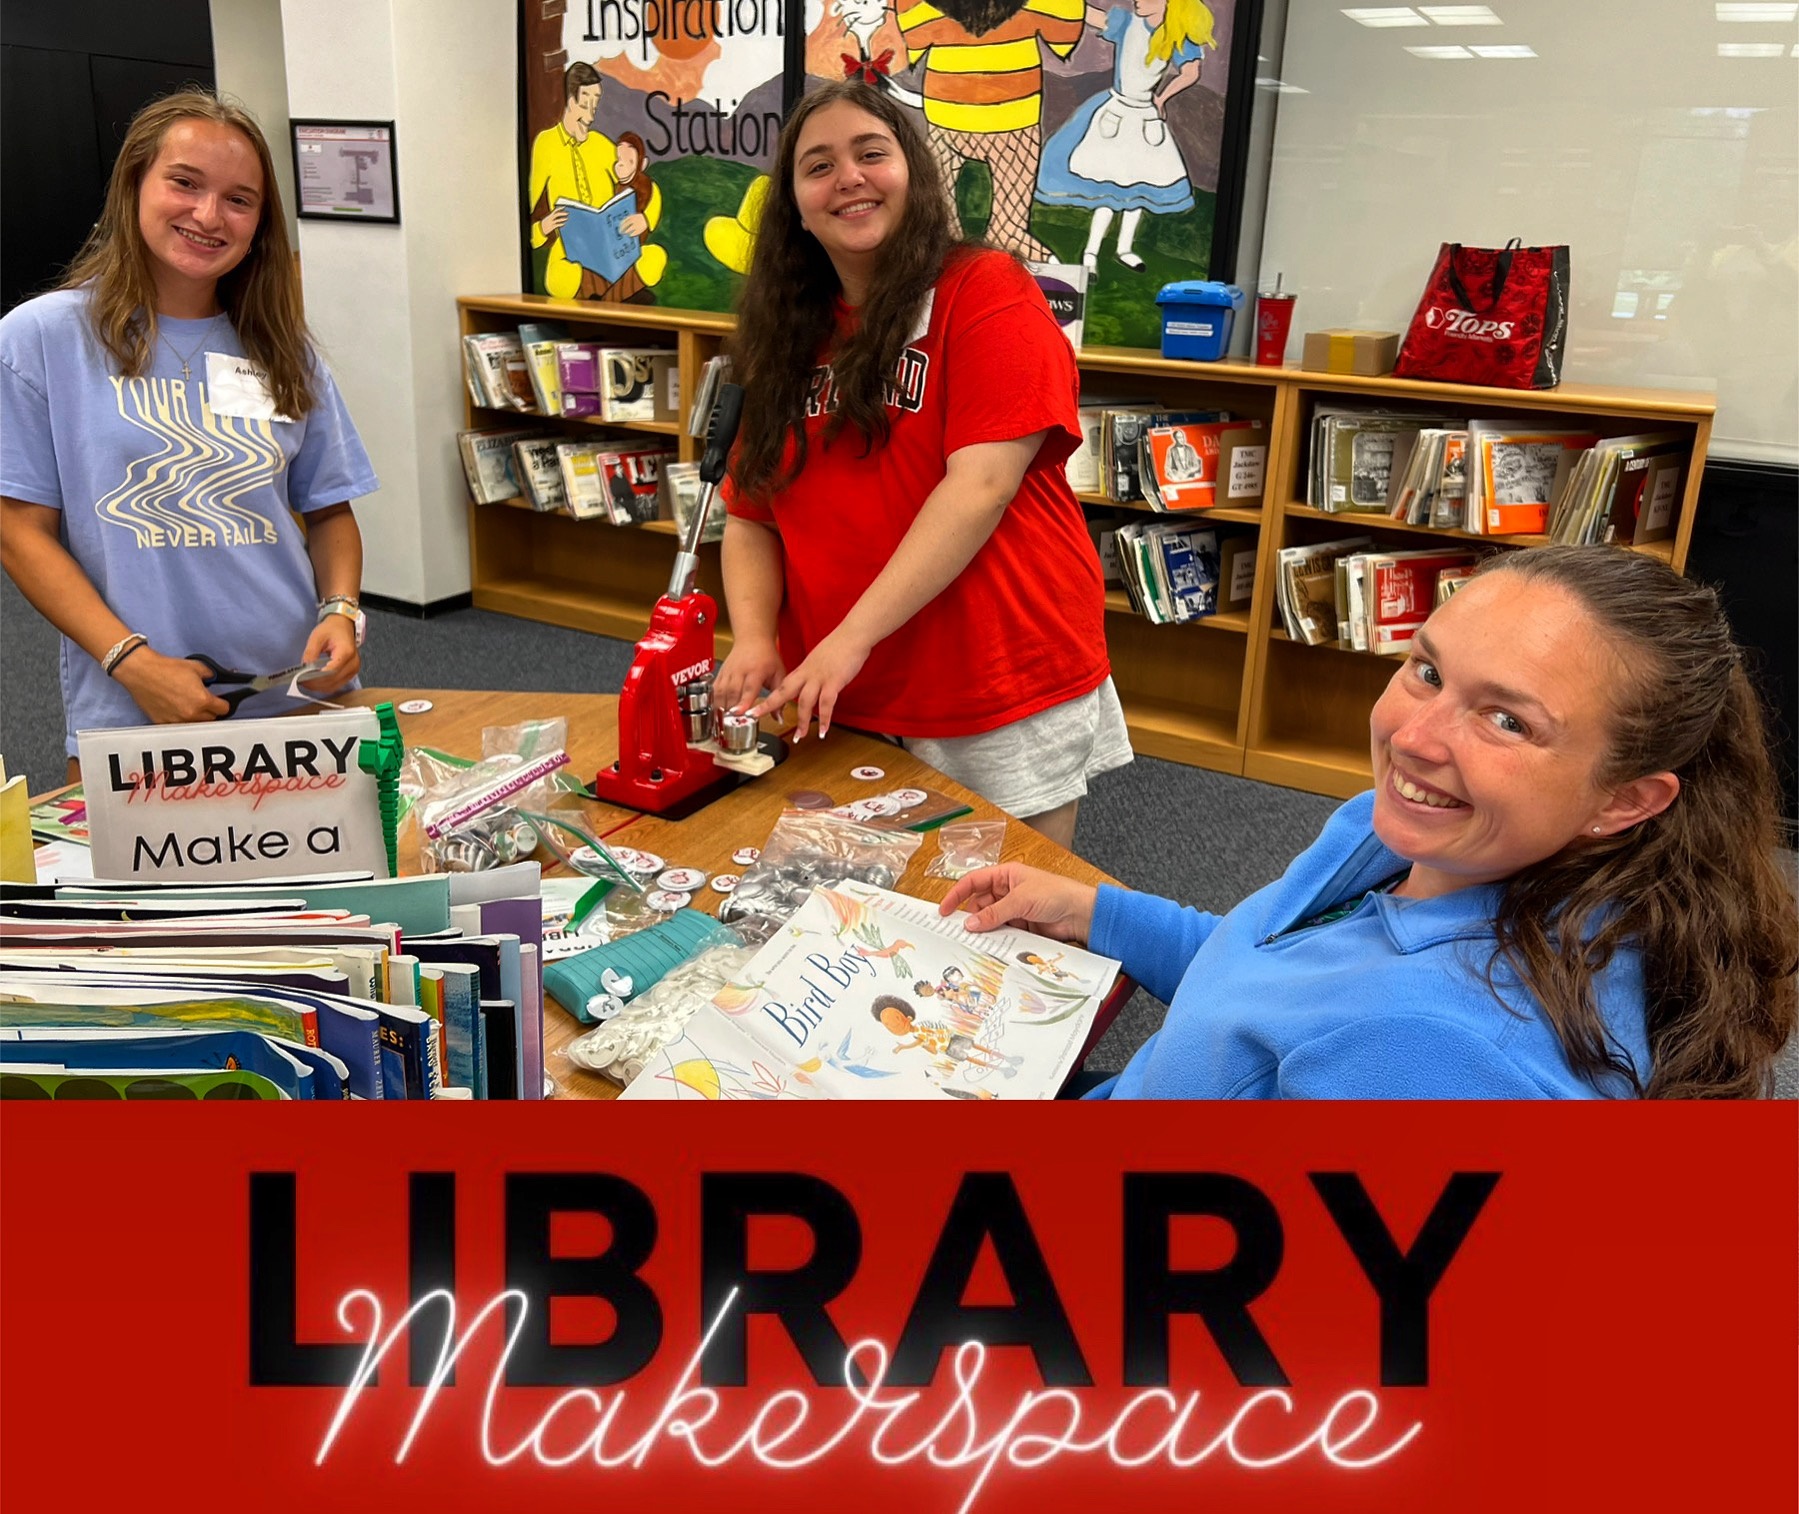 Makerspace at Orientation